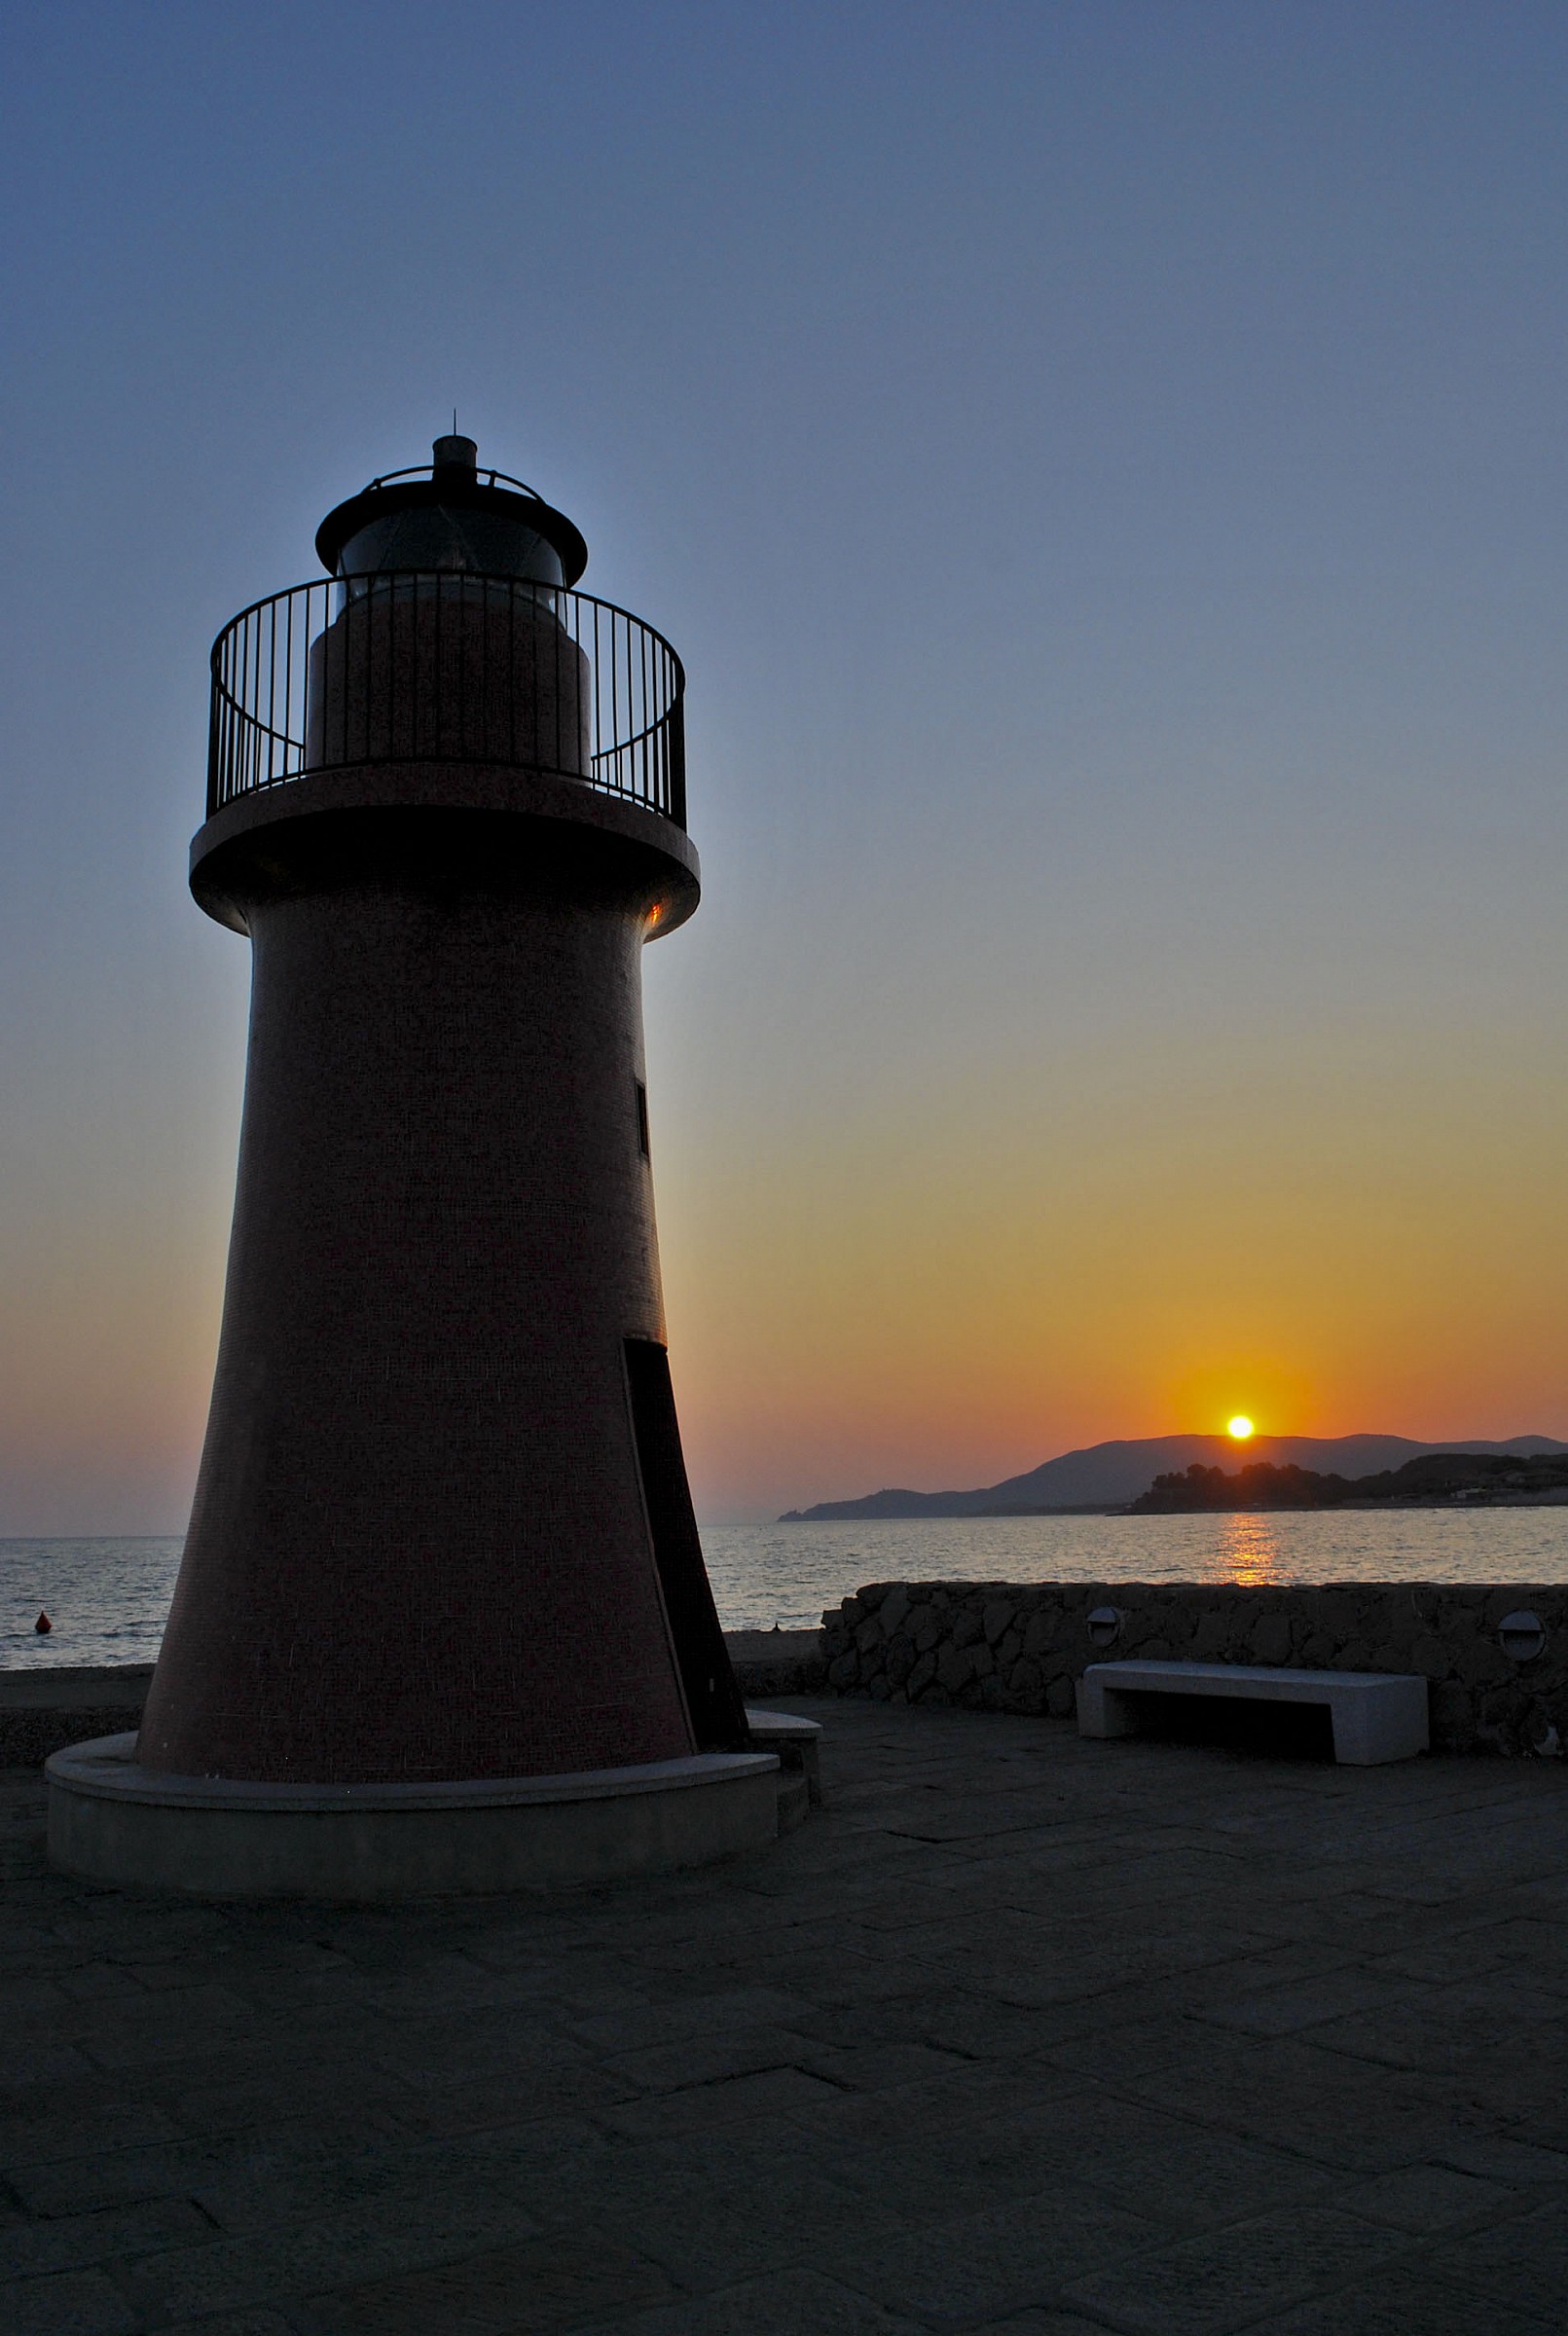 sunset at the lighthouse...